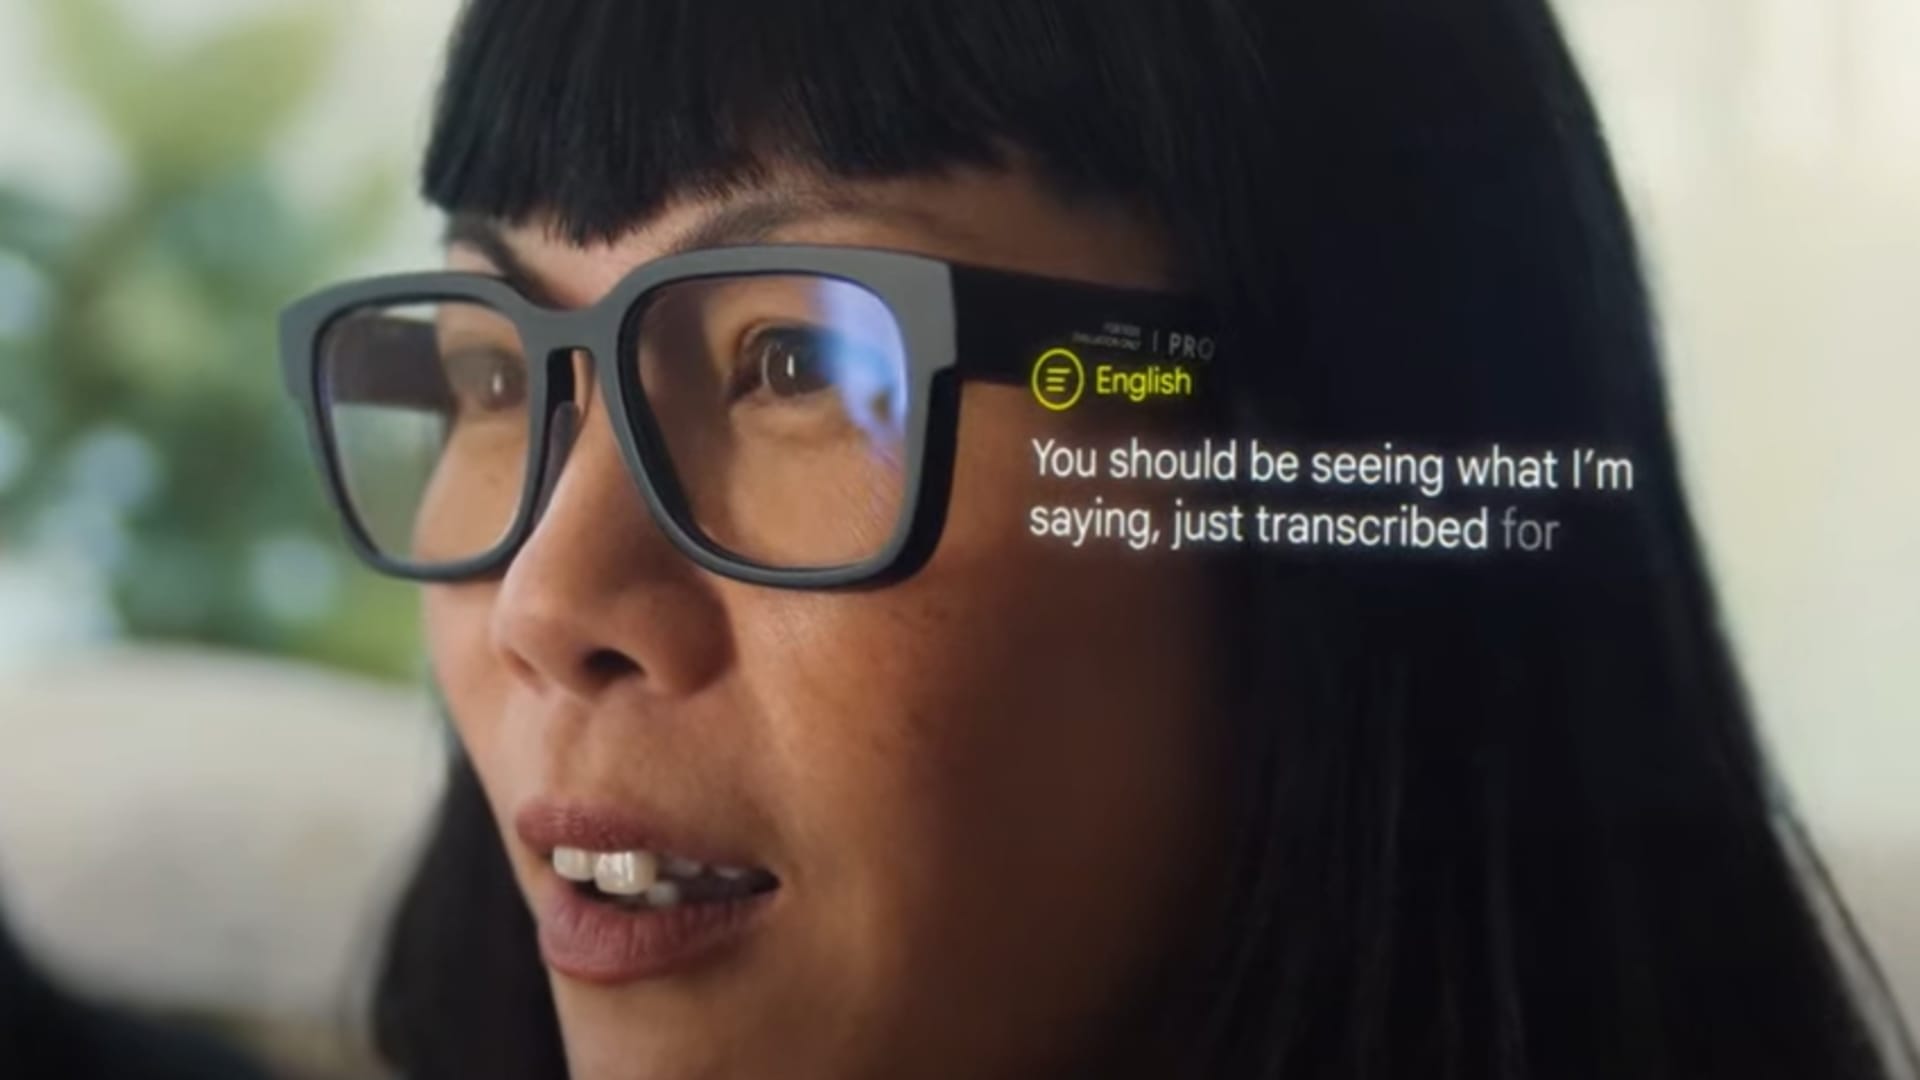 Google's second try at computer glasses translate conversations in real time